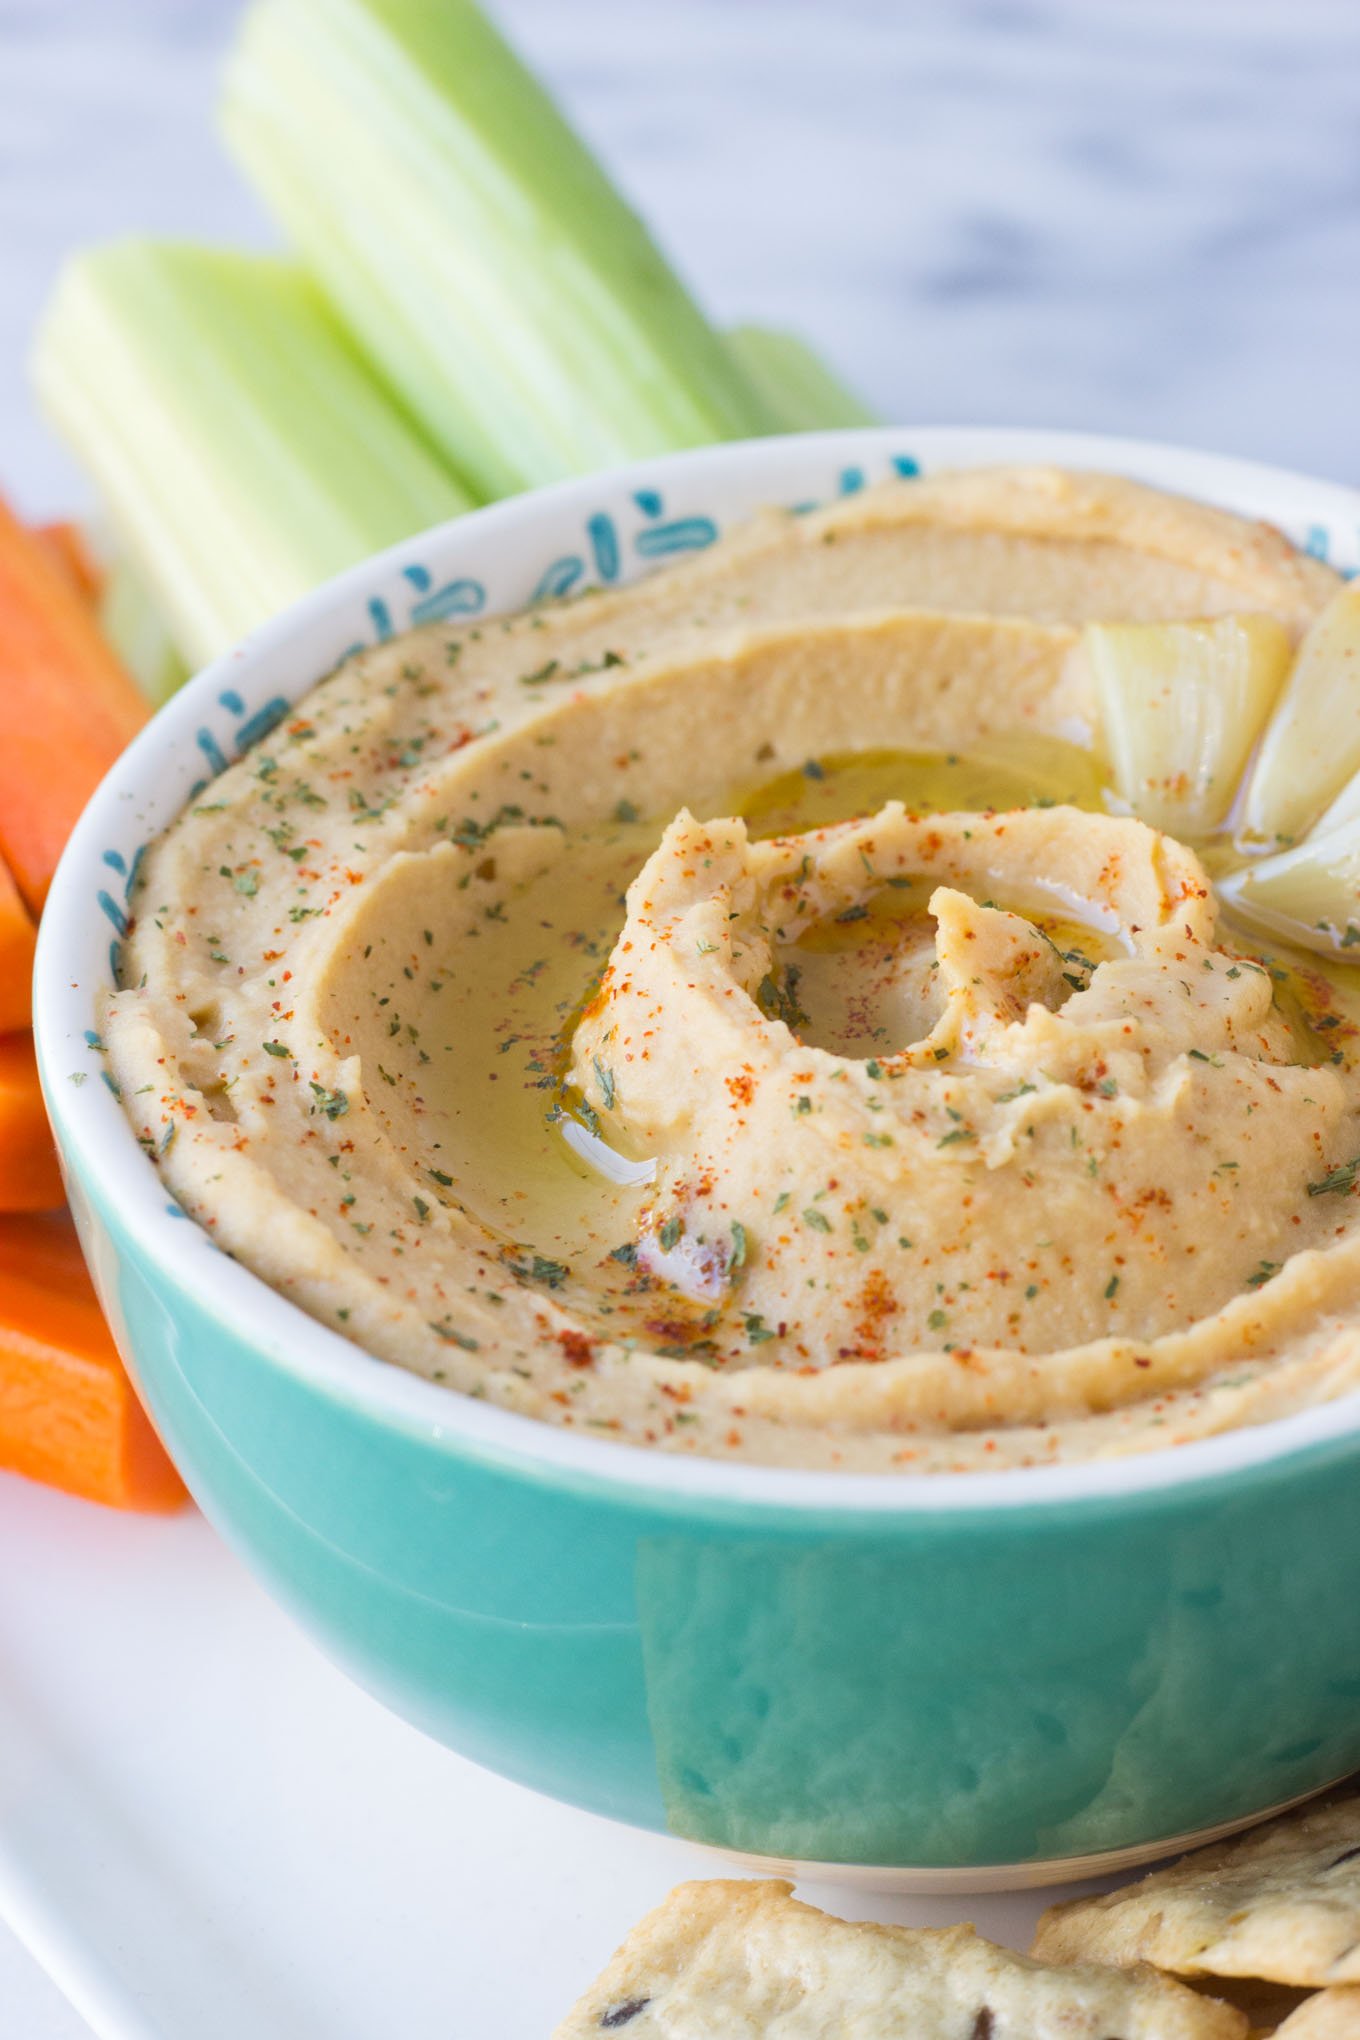 Roasted Garlic Hummus - smooth, creamy hummus with the rich, deep flavor of roasted garlic throughout. Perfect to serve as an appetizer, spread on a sandwich, or take for lunch!